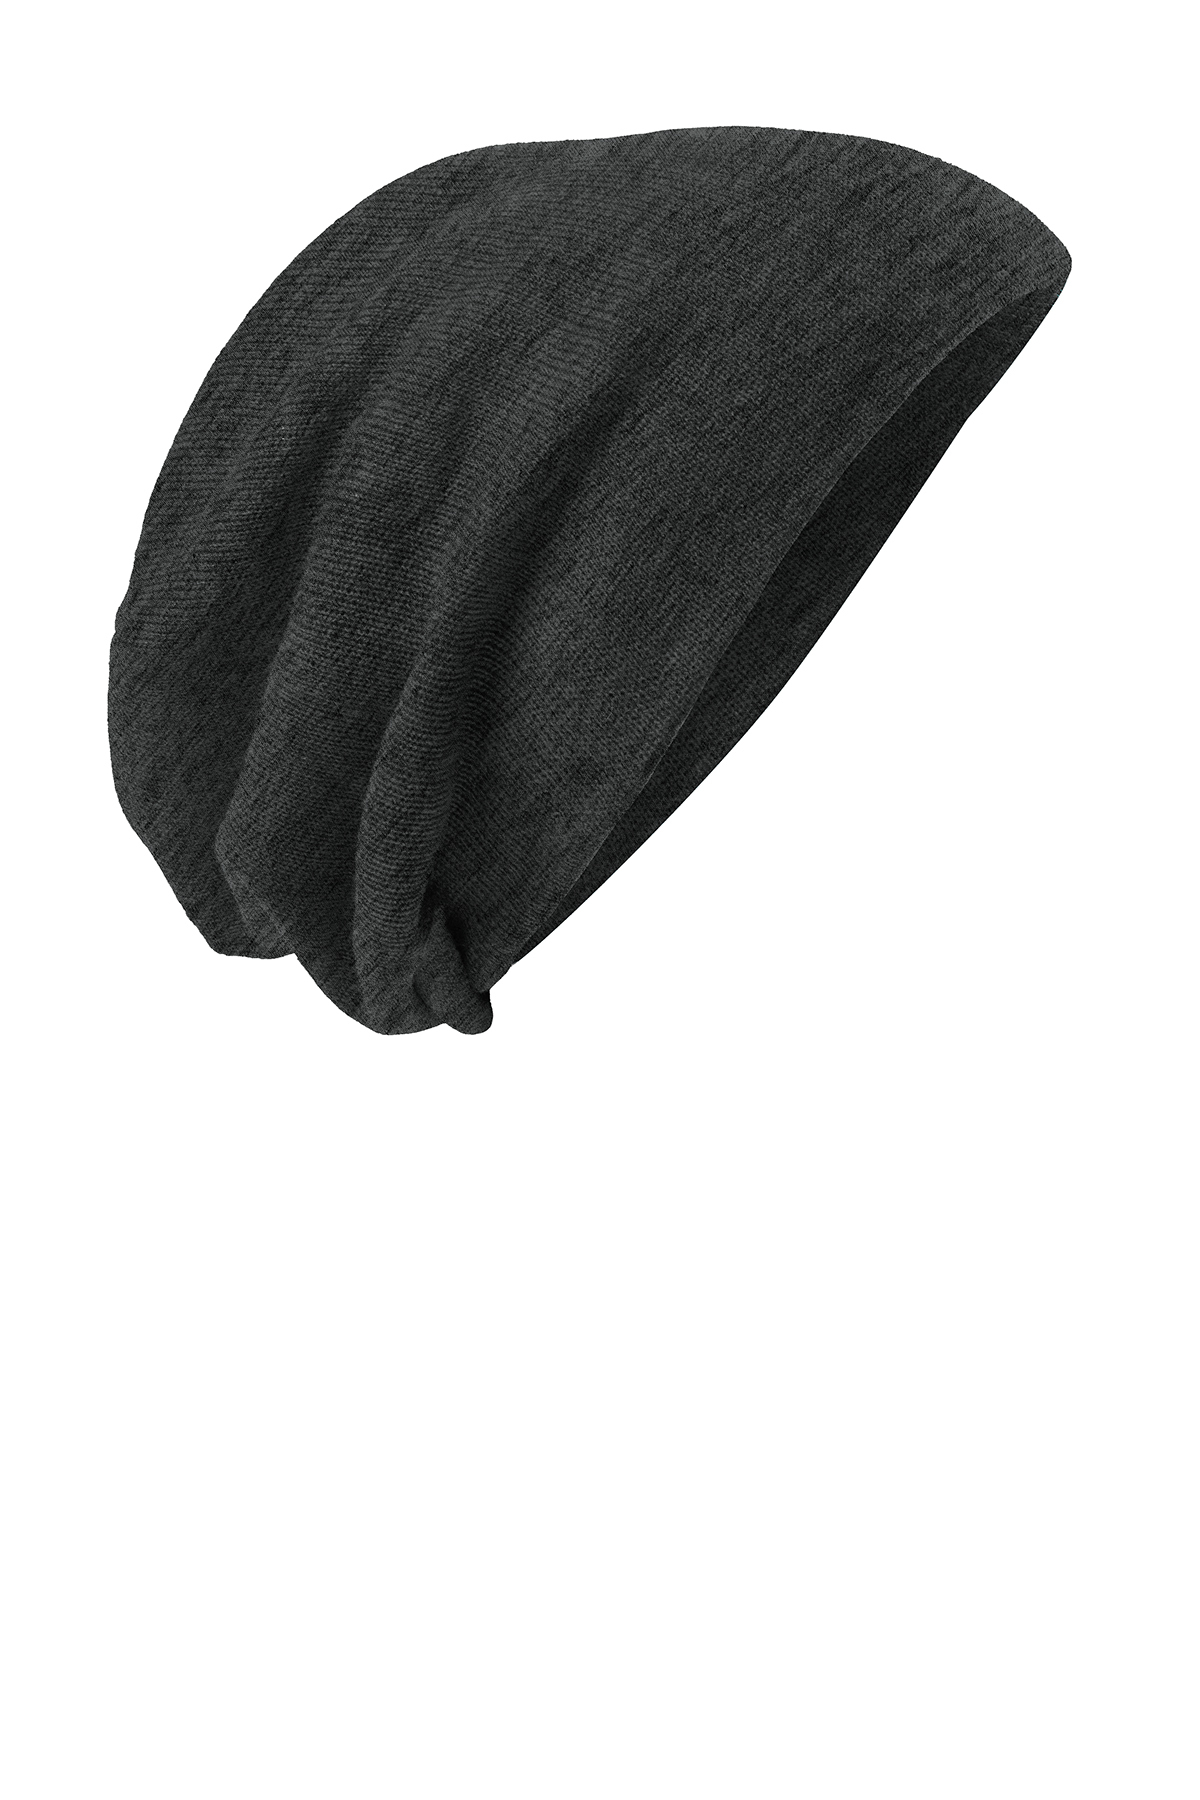 Reversible Slouchy Beanie- Marled Grey & Solid Charcoal Grey